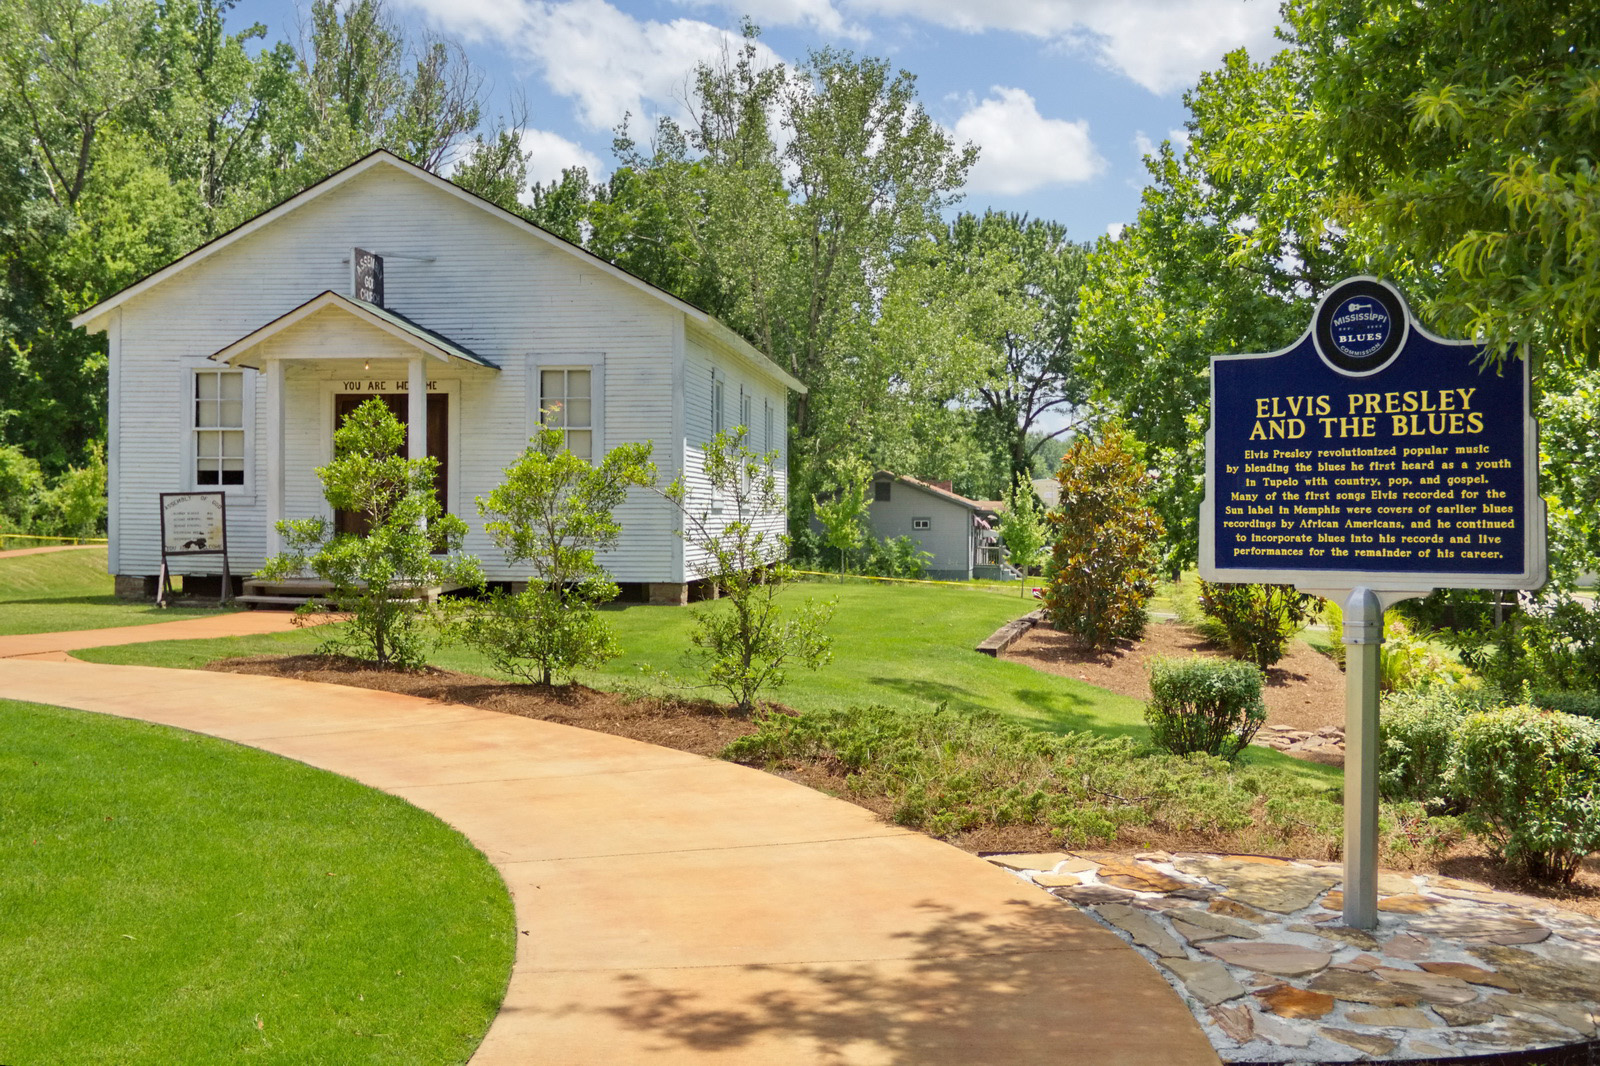 The Church Elvis Presley attended as a child and first sang at, from Tupelo, MS, Elvis Presley Park.